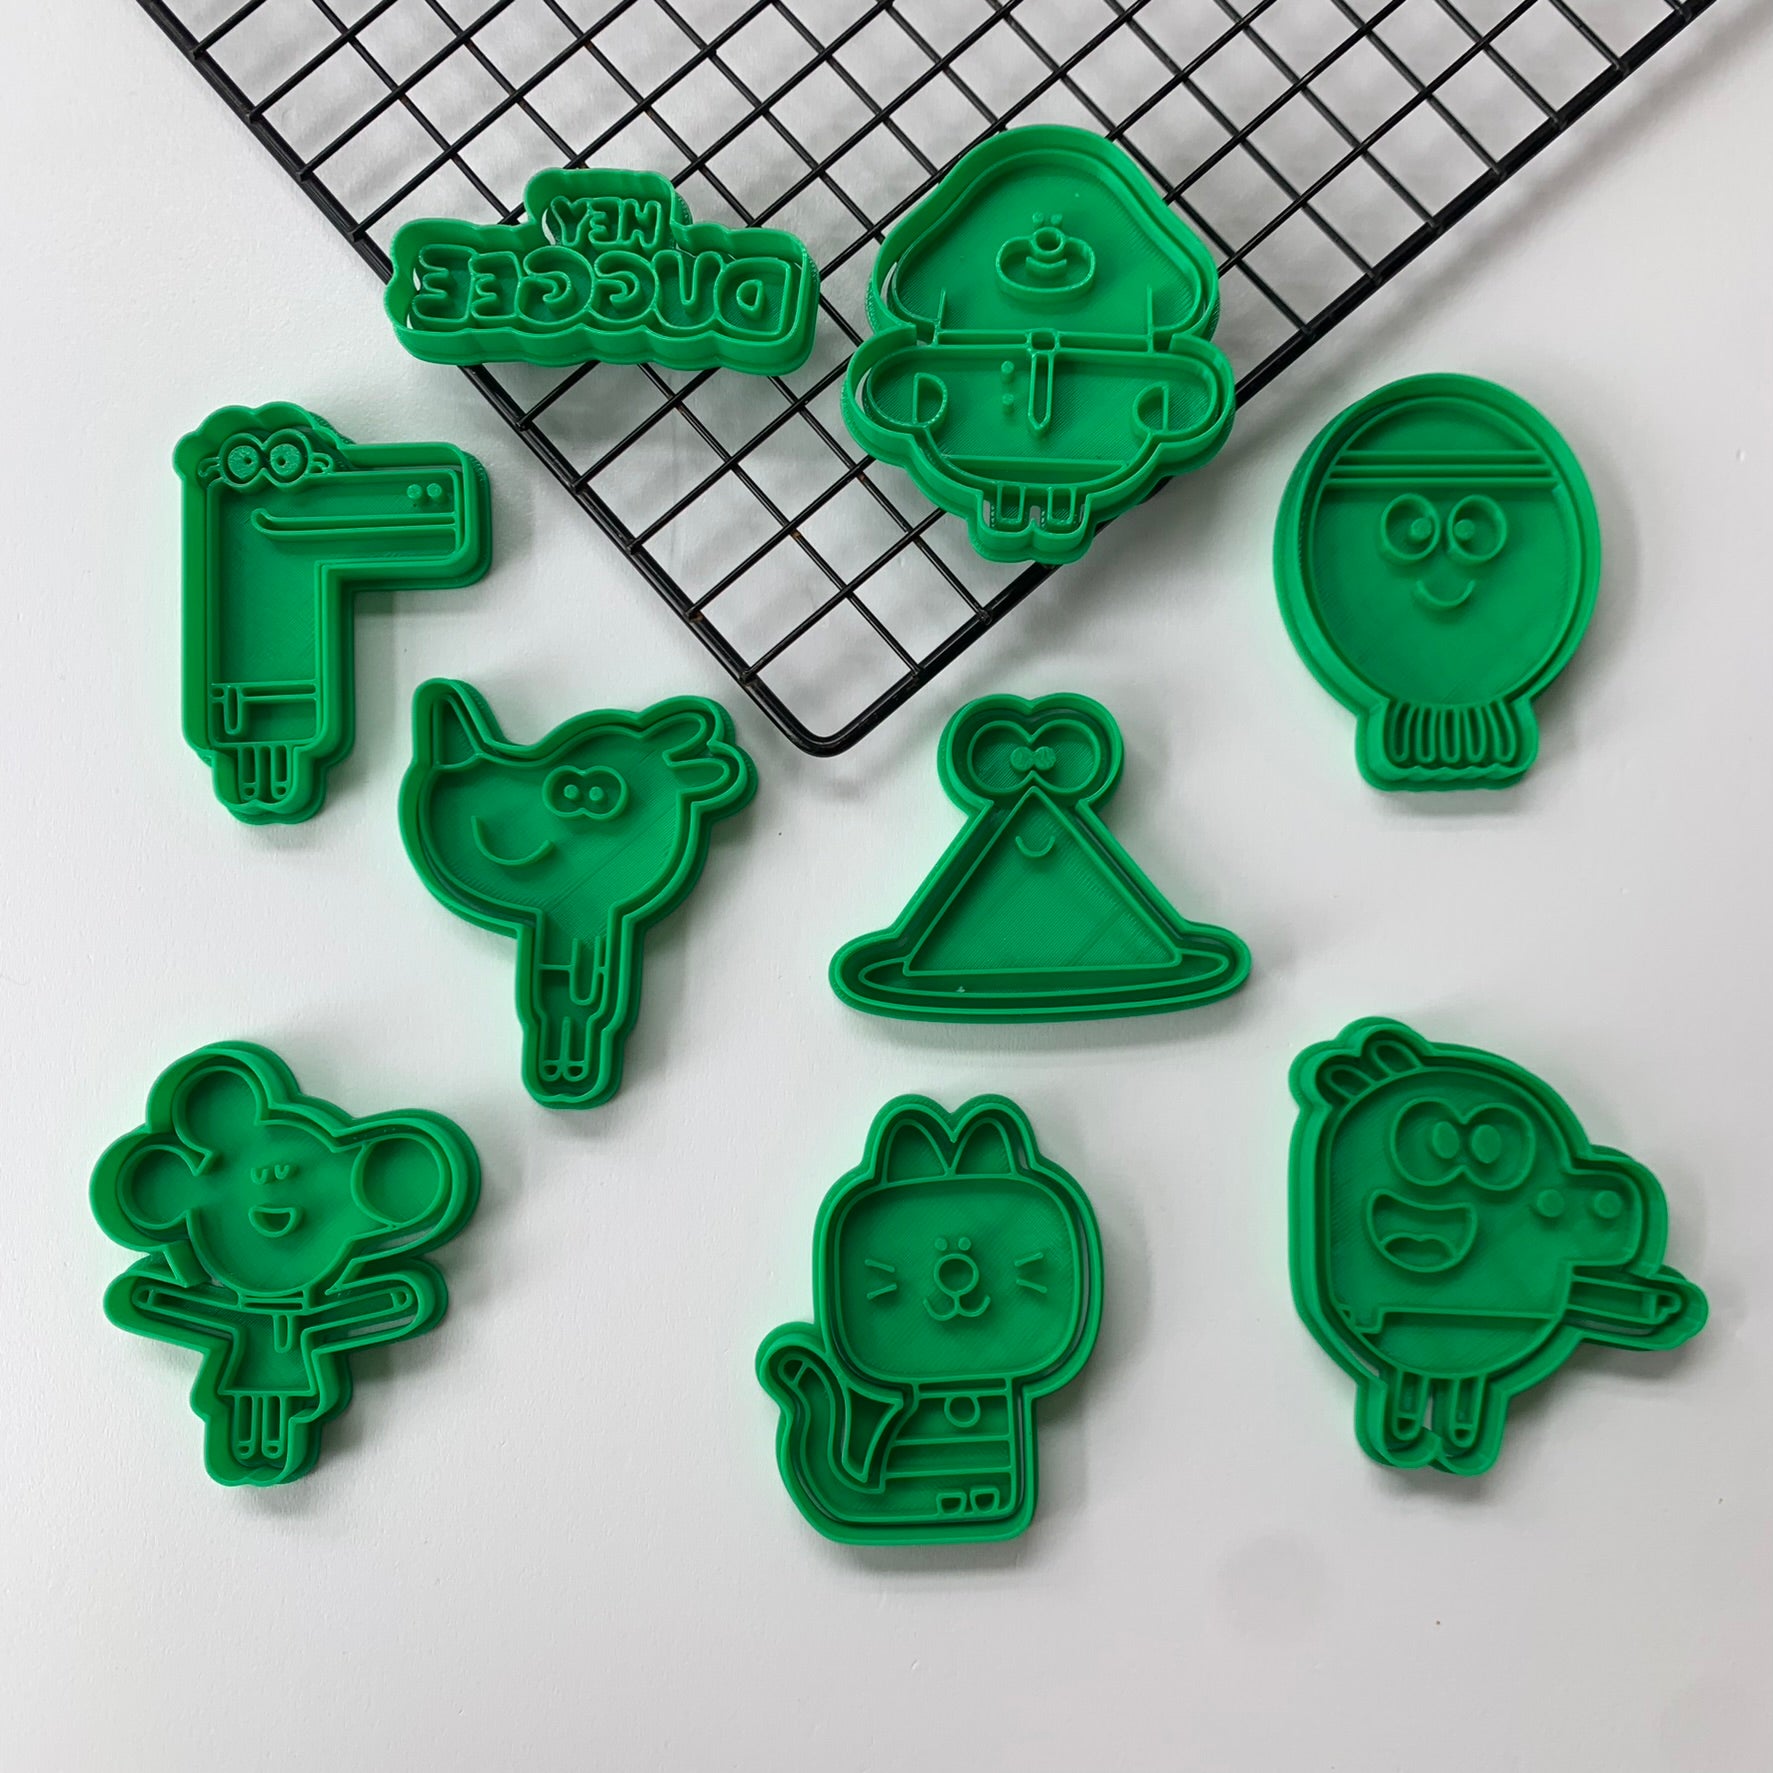 Hey Duggee Cookie Cutter + stamp set of 9 MEG cookie cutters